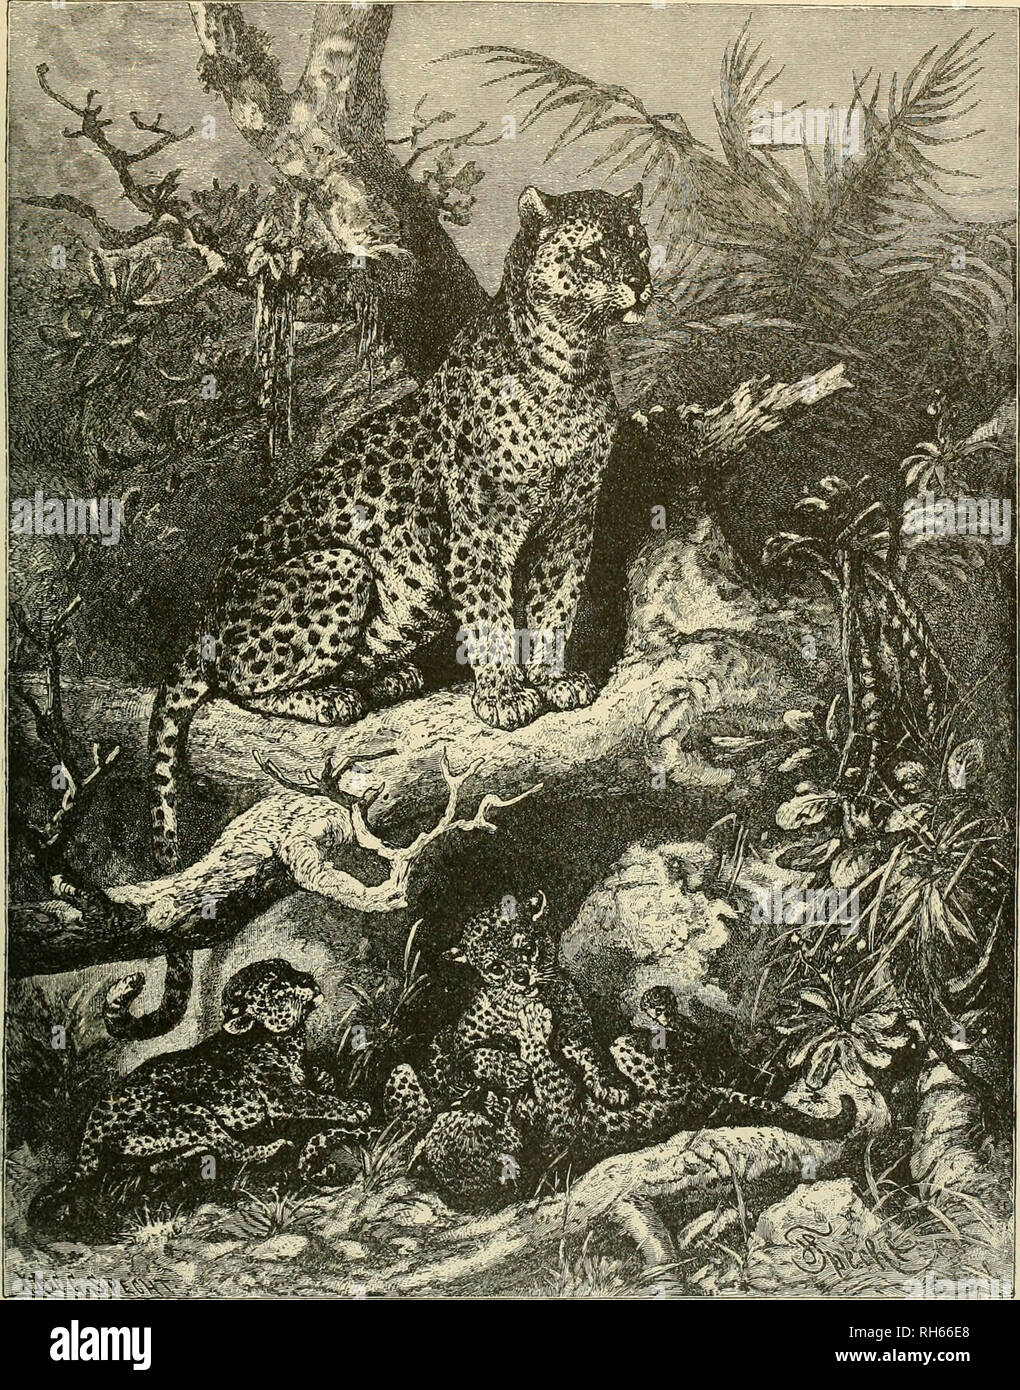 Brehm's Life of animals : a complete natural history for popular home  instruction and for the use of schools. Mammals; Animal behavior.  LEOPARDESS AND YOUNG. Here is shown a Leopardess in